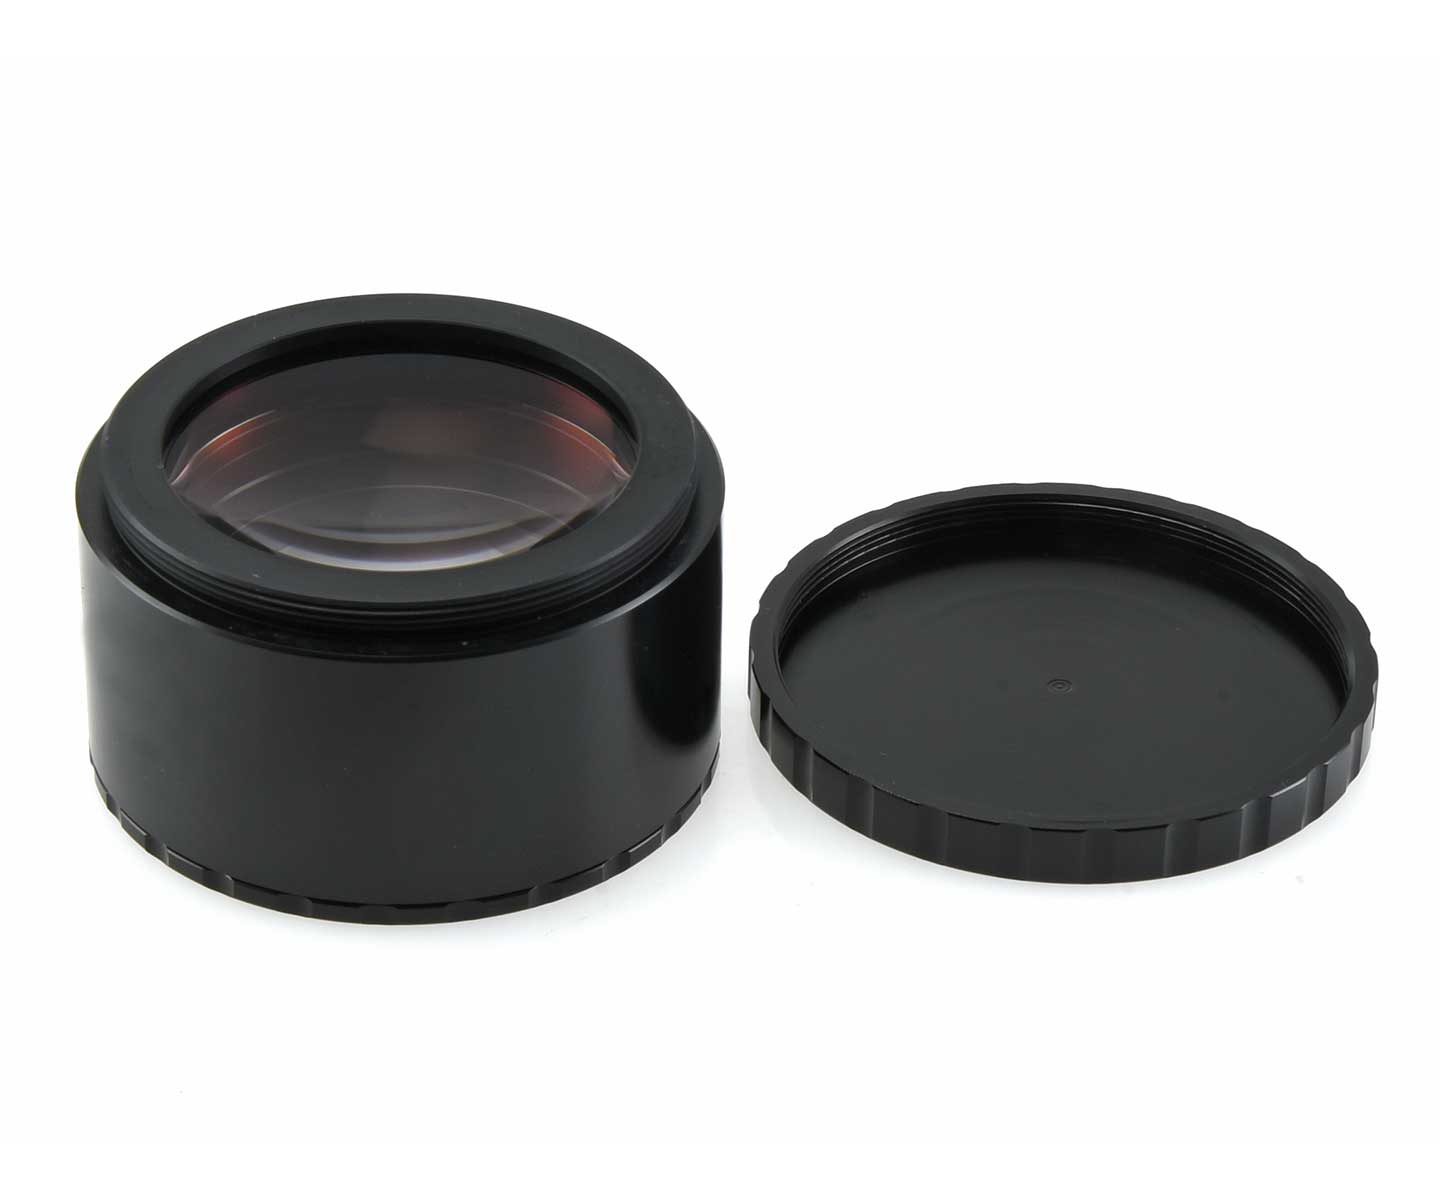  The corrector and focal reducer is designed especially for Ritchey-Chrétien telescopes and shortens the focal length while correcting the image field at the same time. 